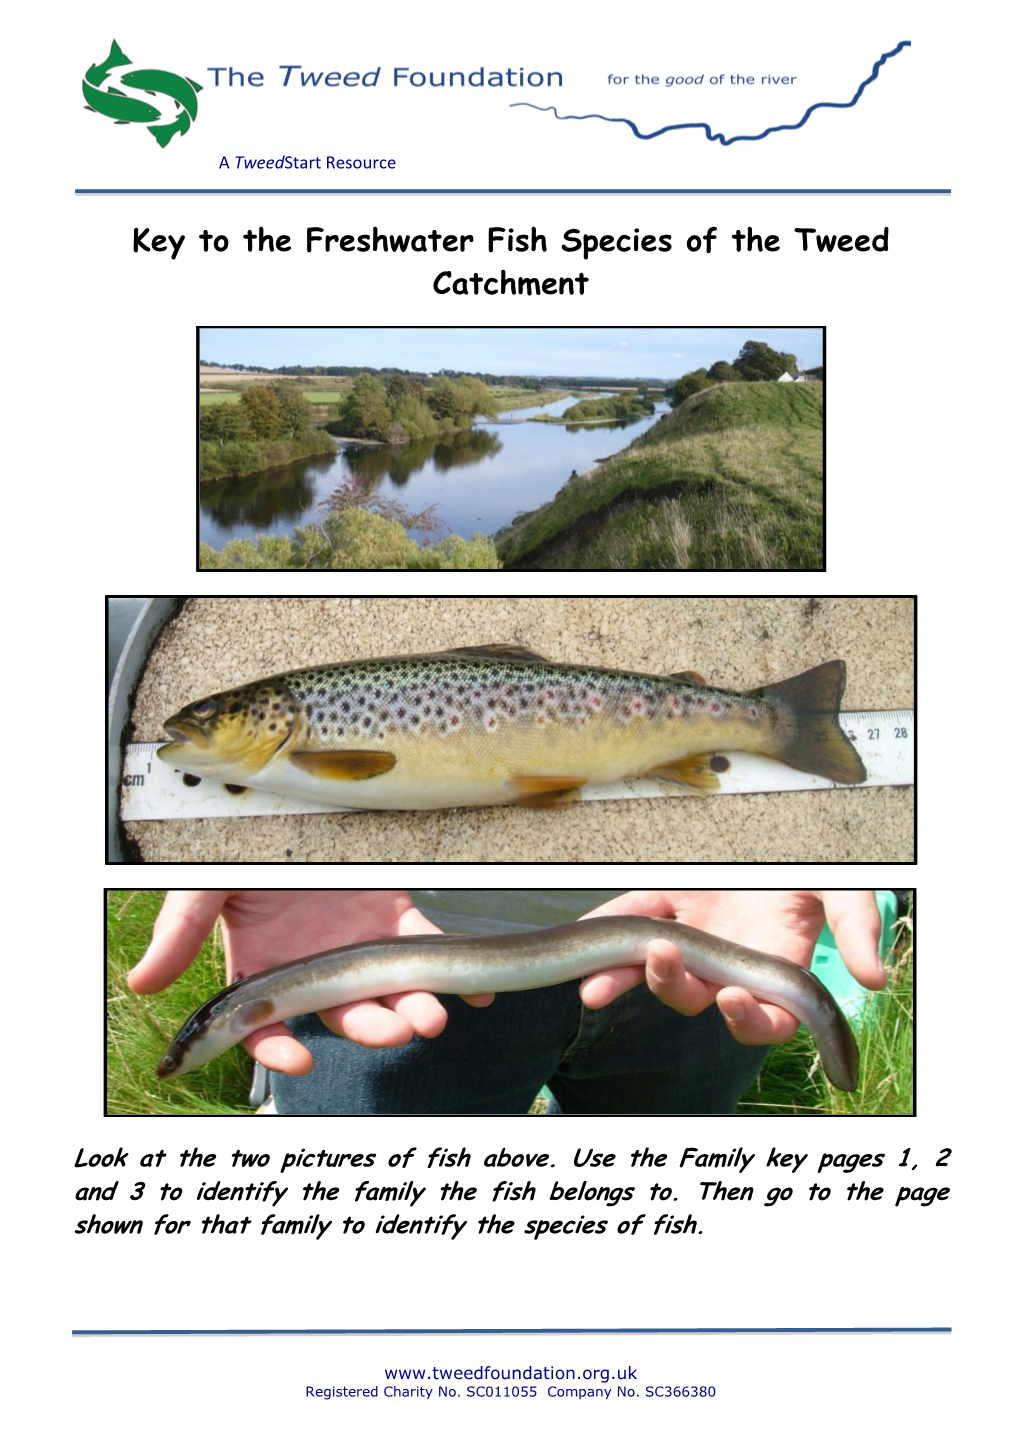 Key to the Freshwater Fish Species of the Tweed Catchment